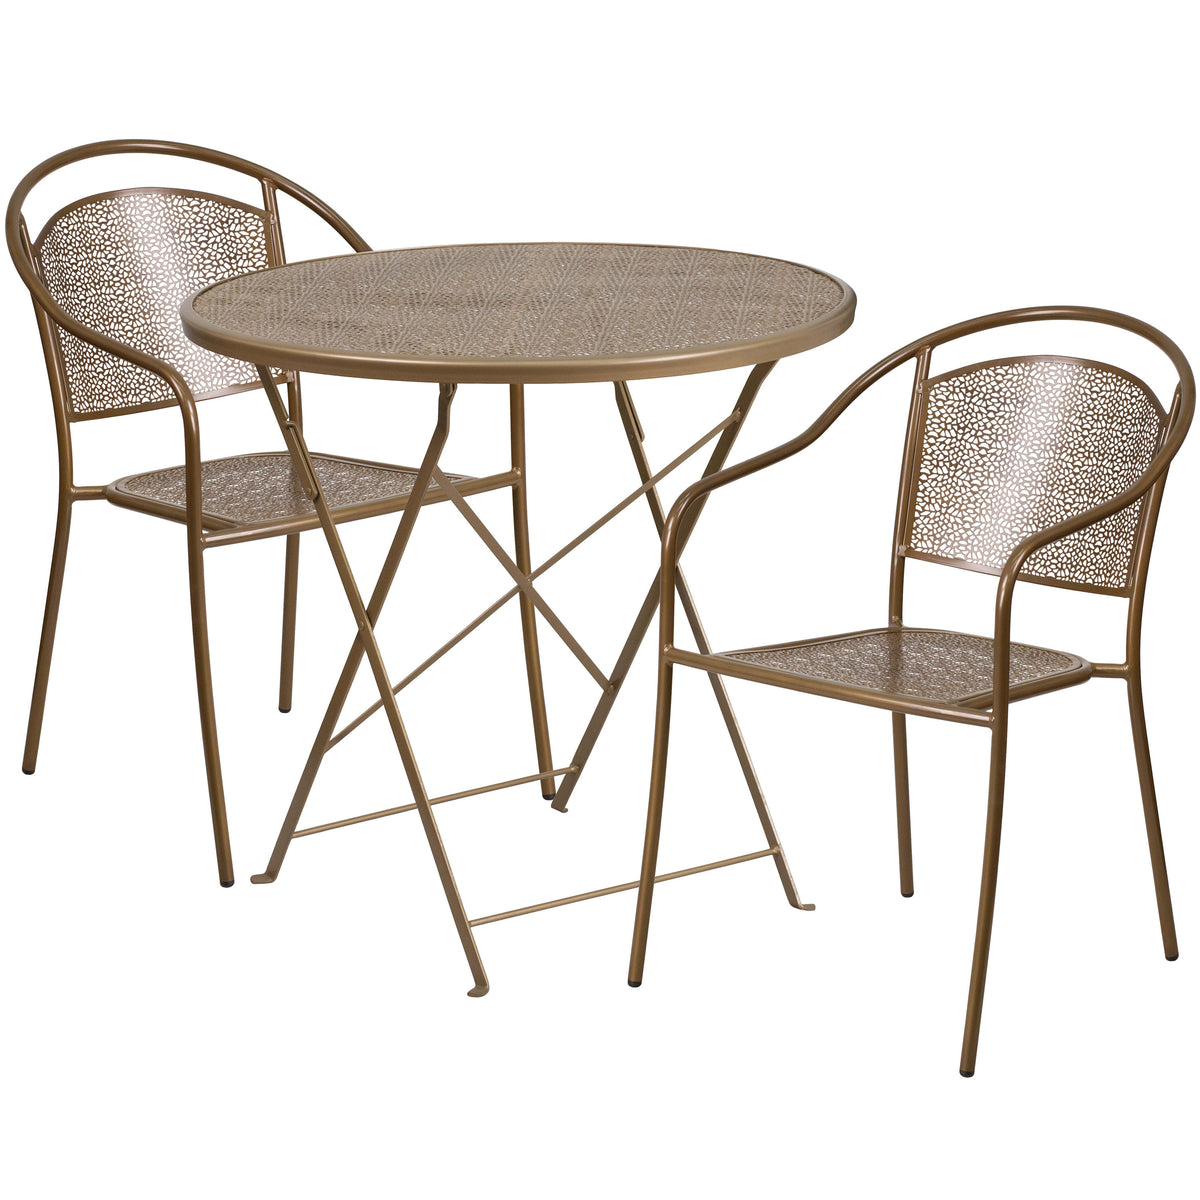 Gold |#| 30inch Round Gold Indoor-Outdoor Steel Folding Patio Table Set with 2 Chairs